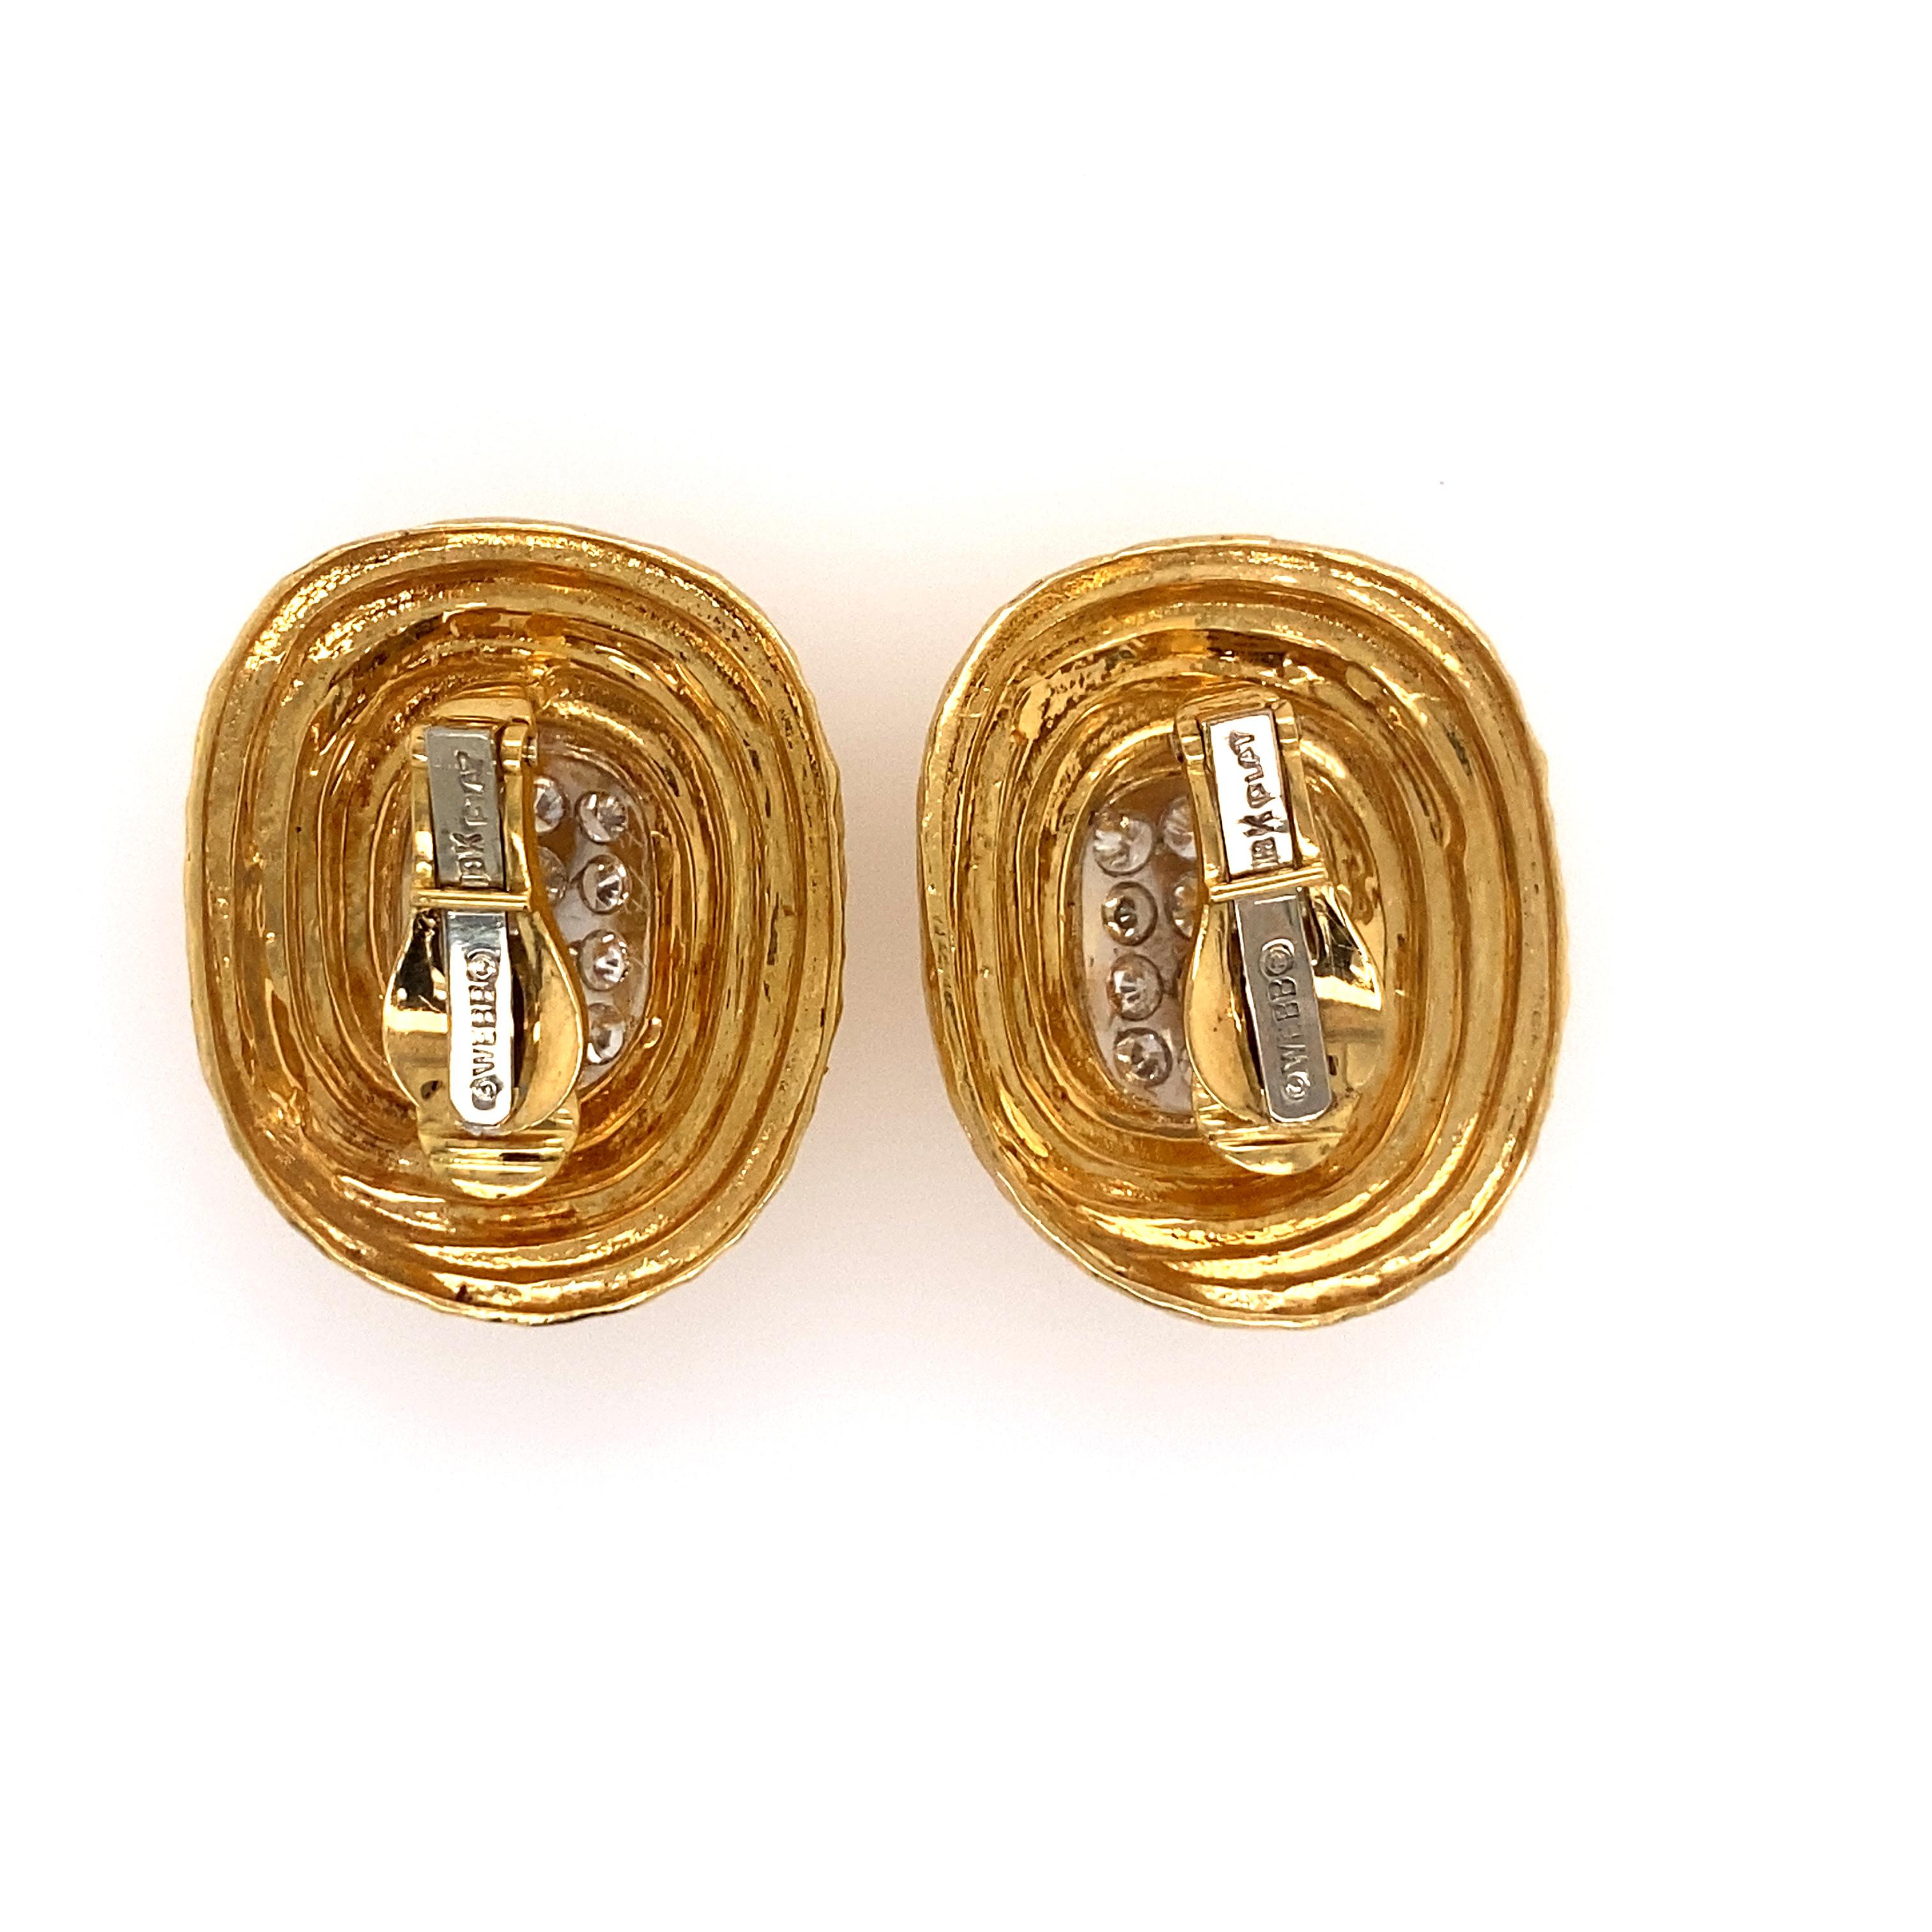 Pair of David Webb 18K yellow gold, platinum & diamond ear clips. Large and elegant, featuring central rectangular plaques accented with approx. 3.50cts. total weight of pave brilliant cut diamonds framed in a classic textured 18K yellow gold